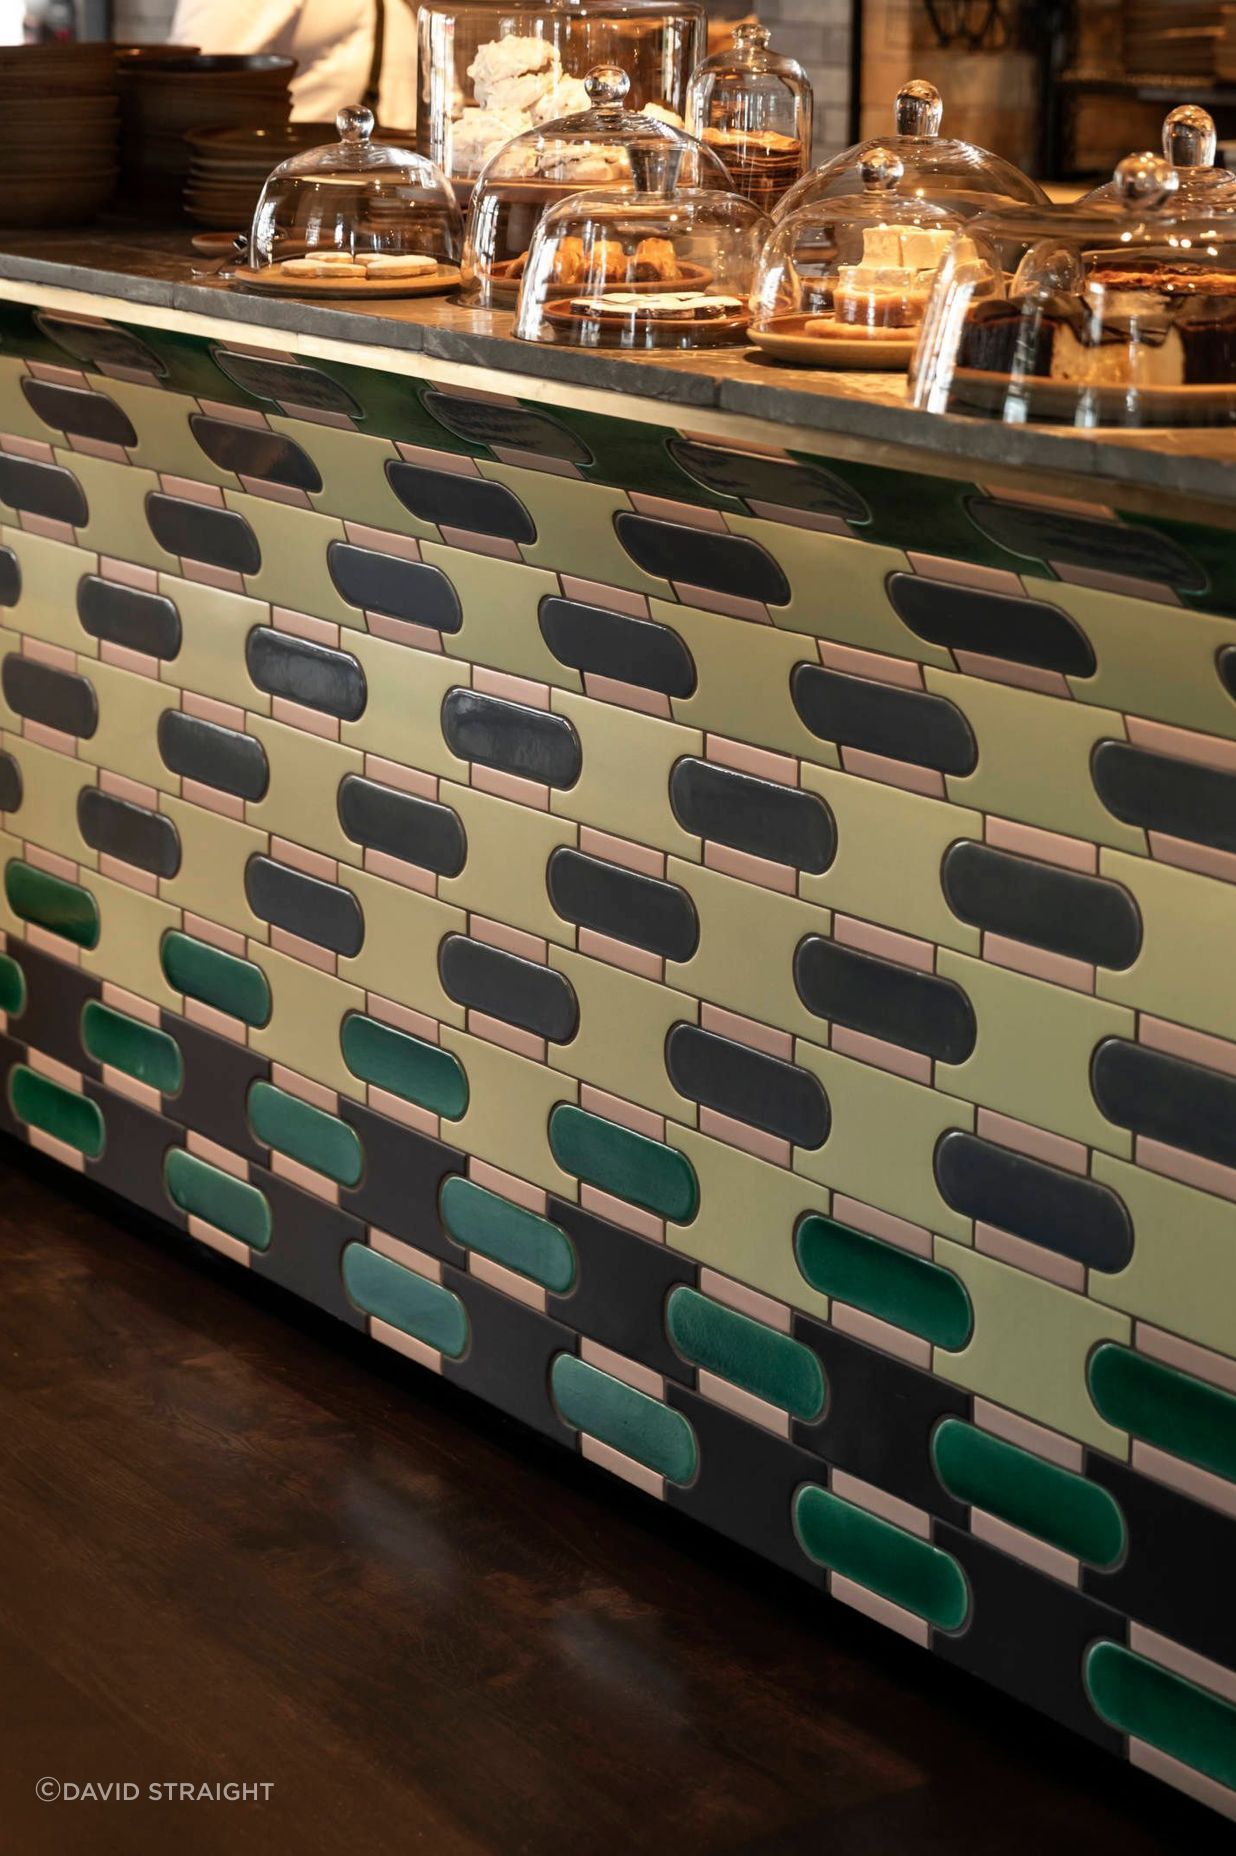 Colourful handmade tiles were chosen for the base of the bar counter and laid to accommodate a seamless pattern.